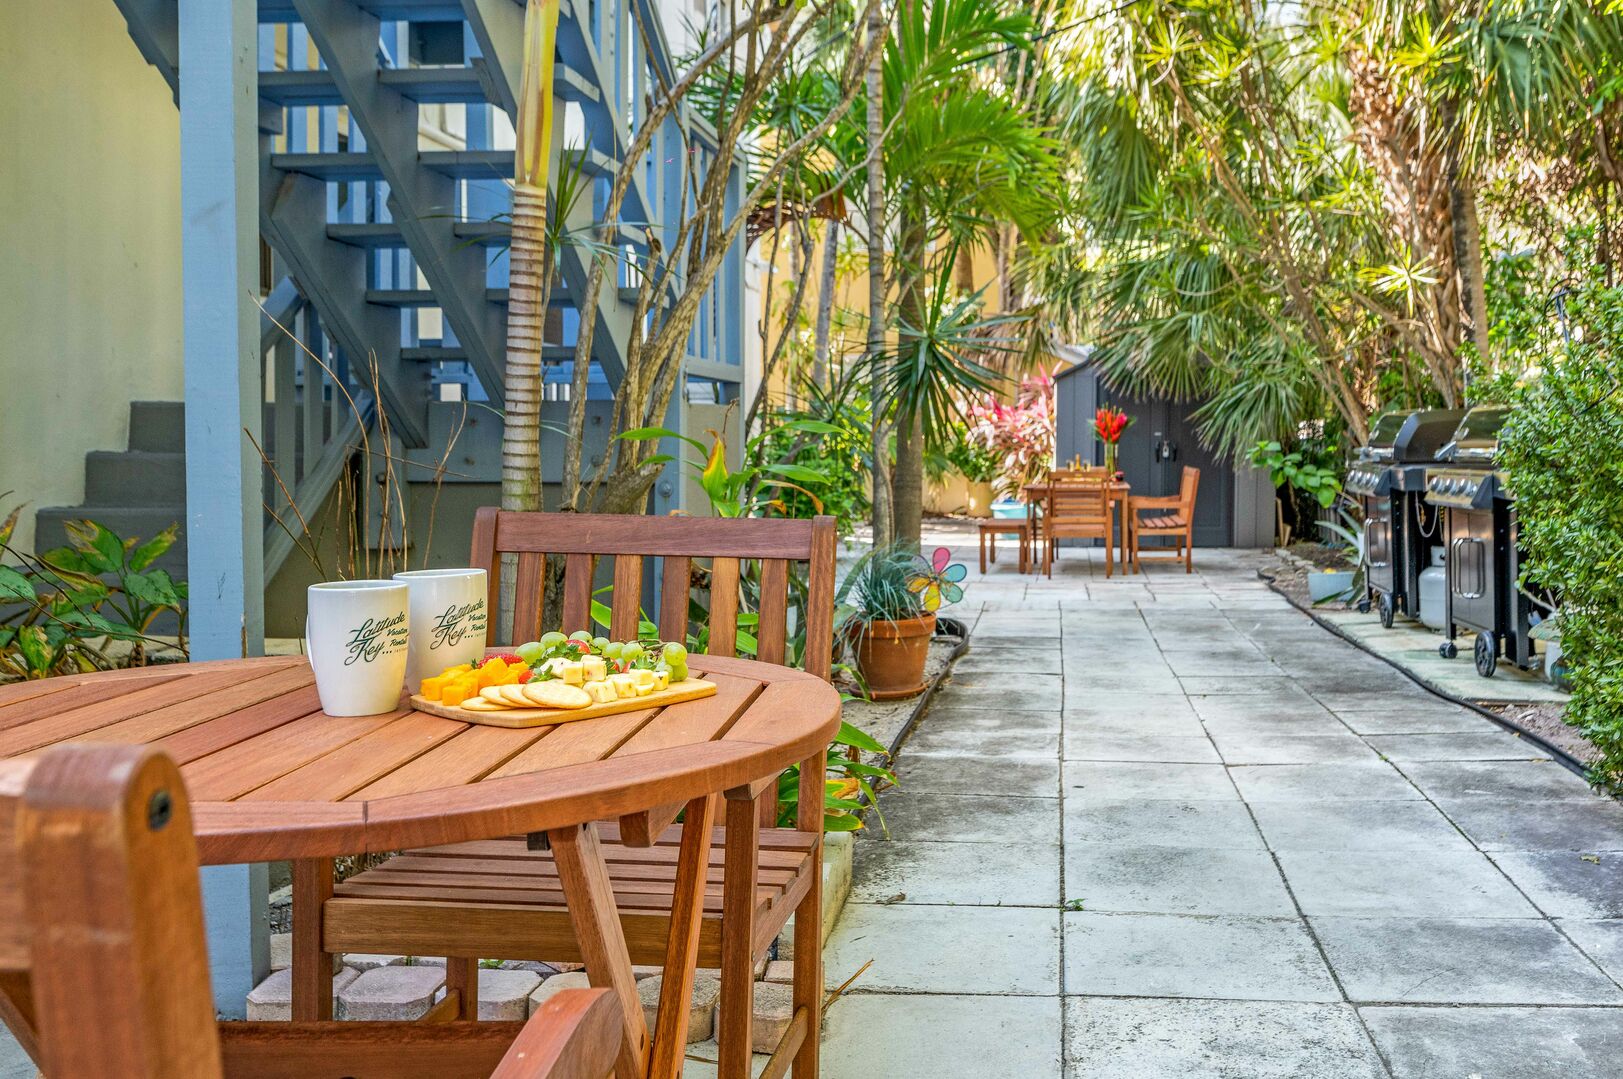 Relax in the greenery of this oasis backyard patio also featuring a grilling area.